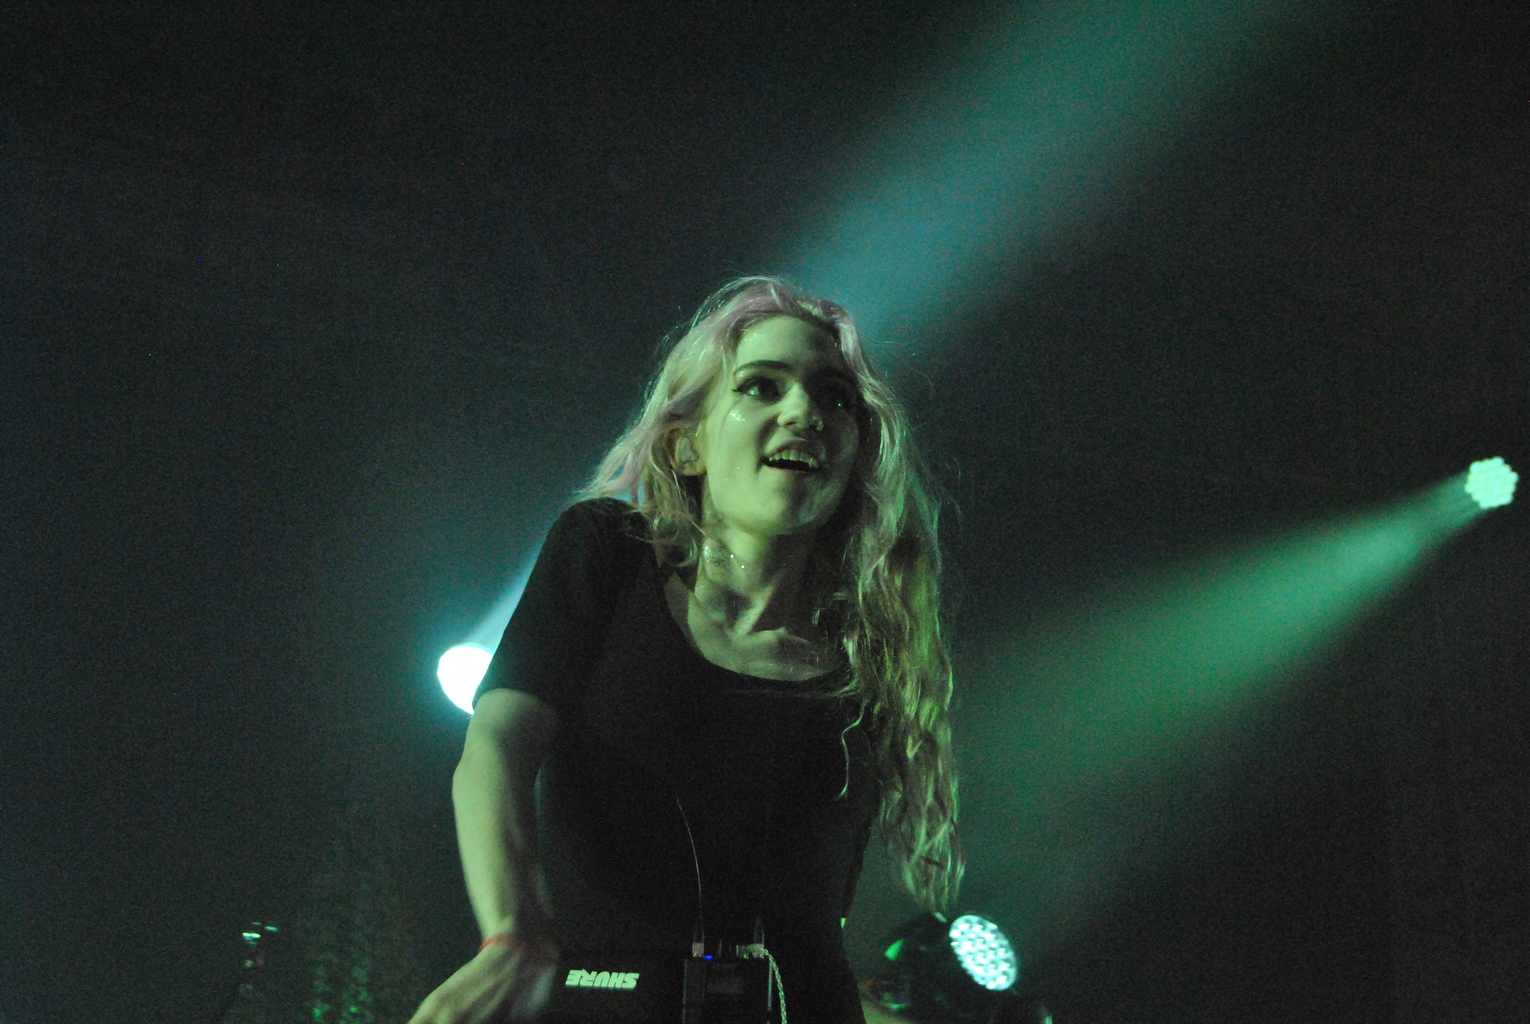 grimes performing on stage